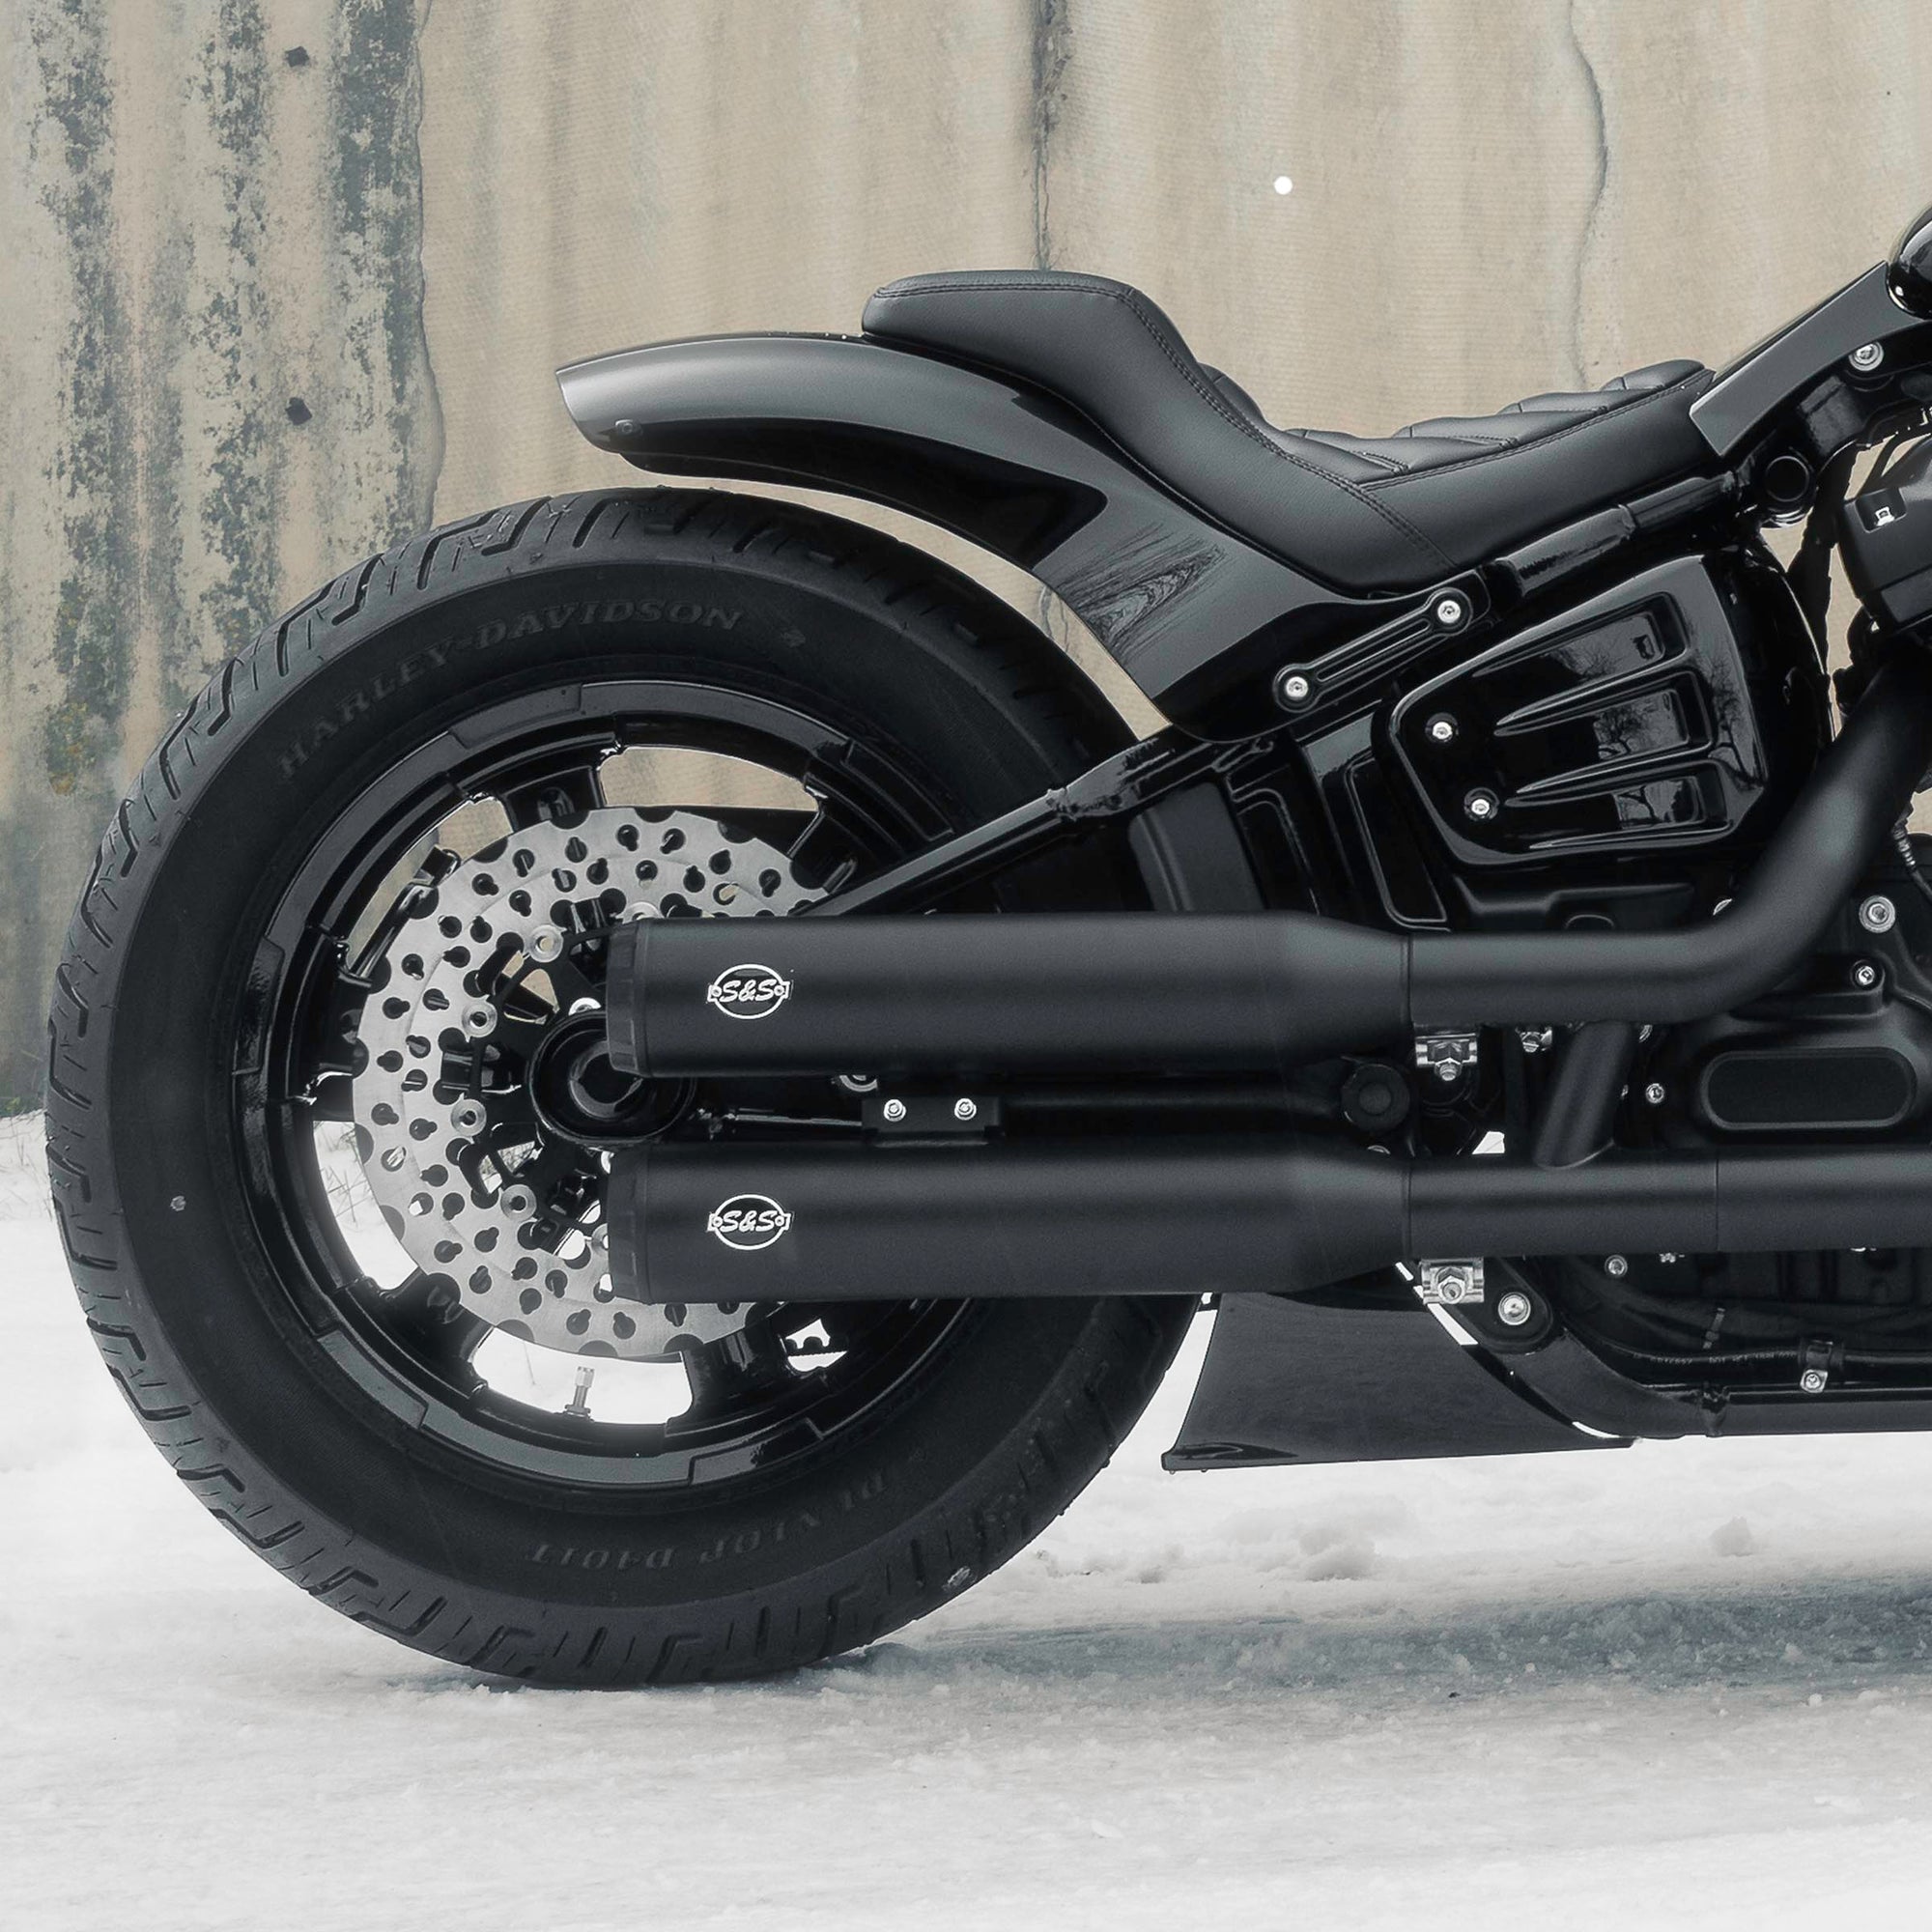 Zoomed Harley Davidson Softail motorcycle with Killer Custom parts from the side outside with some visible snow on the ground neutral background